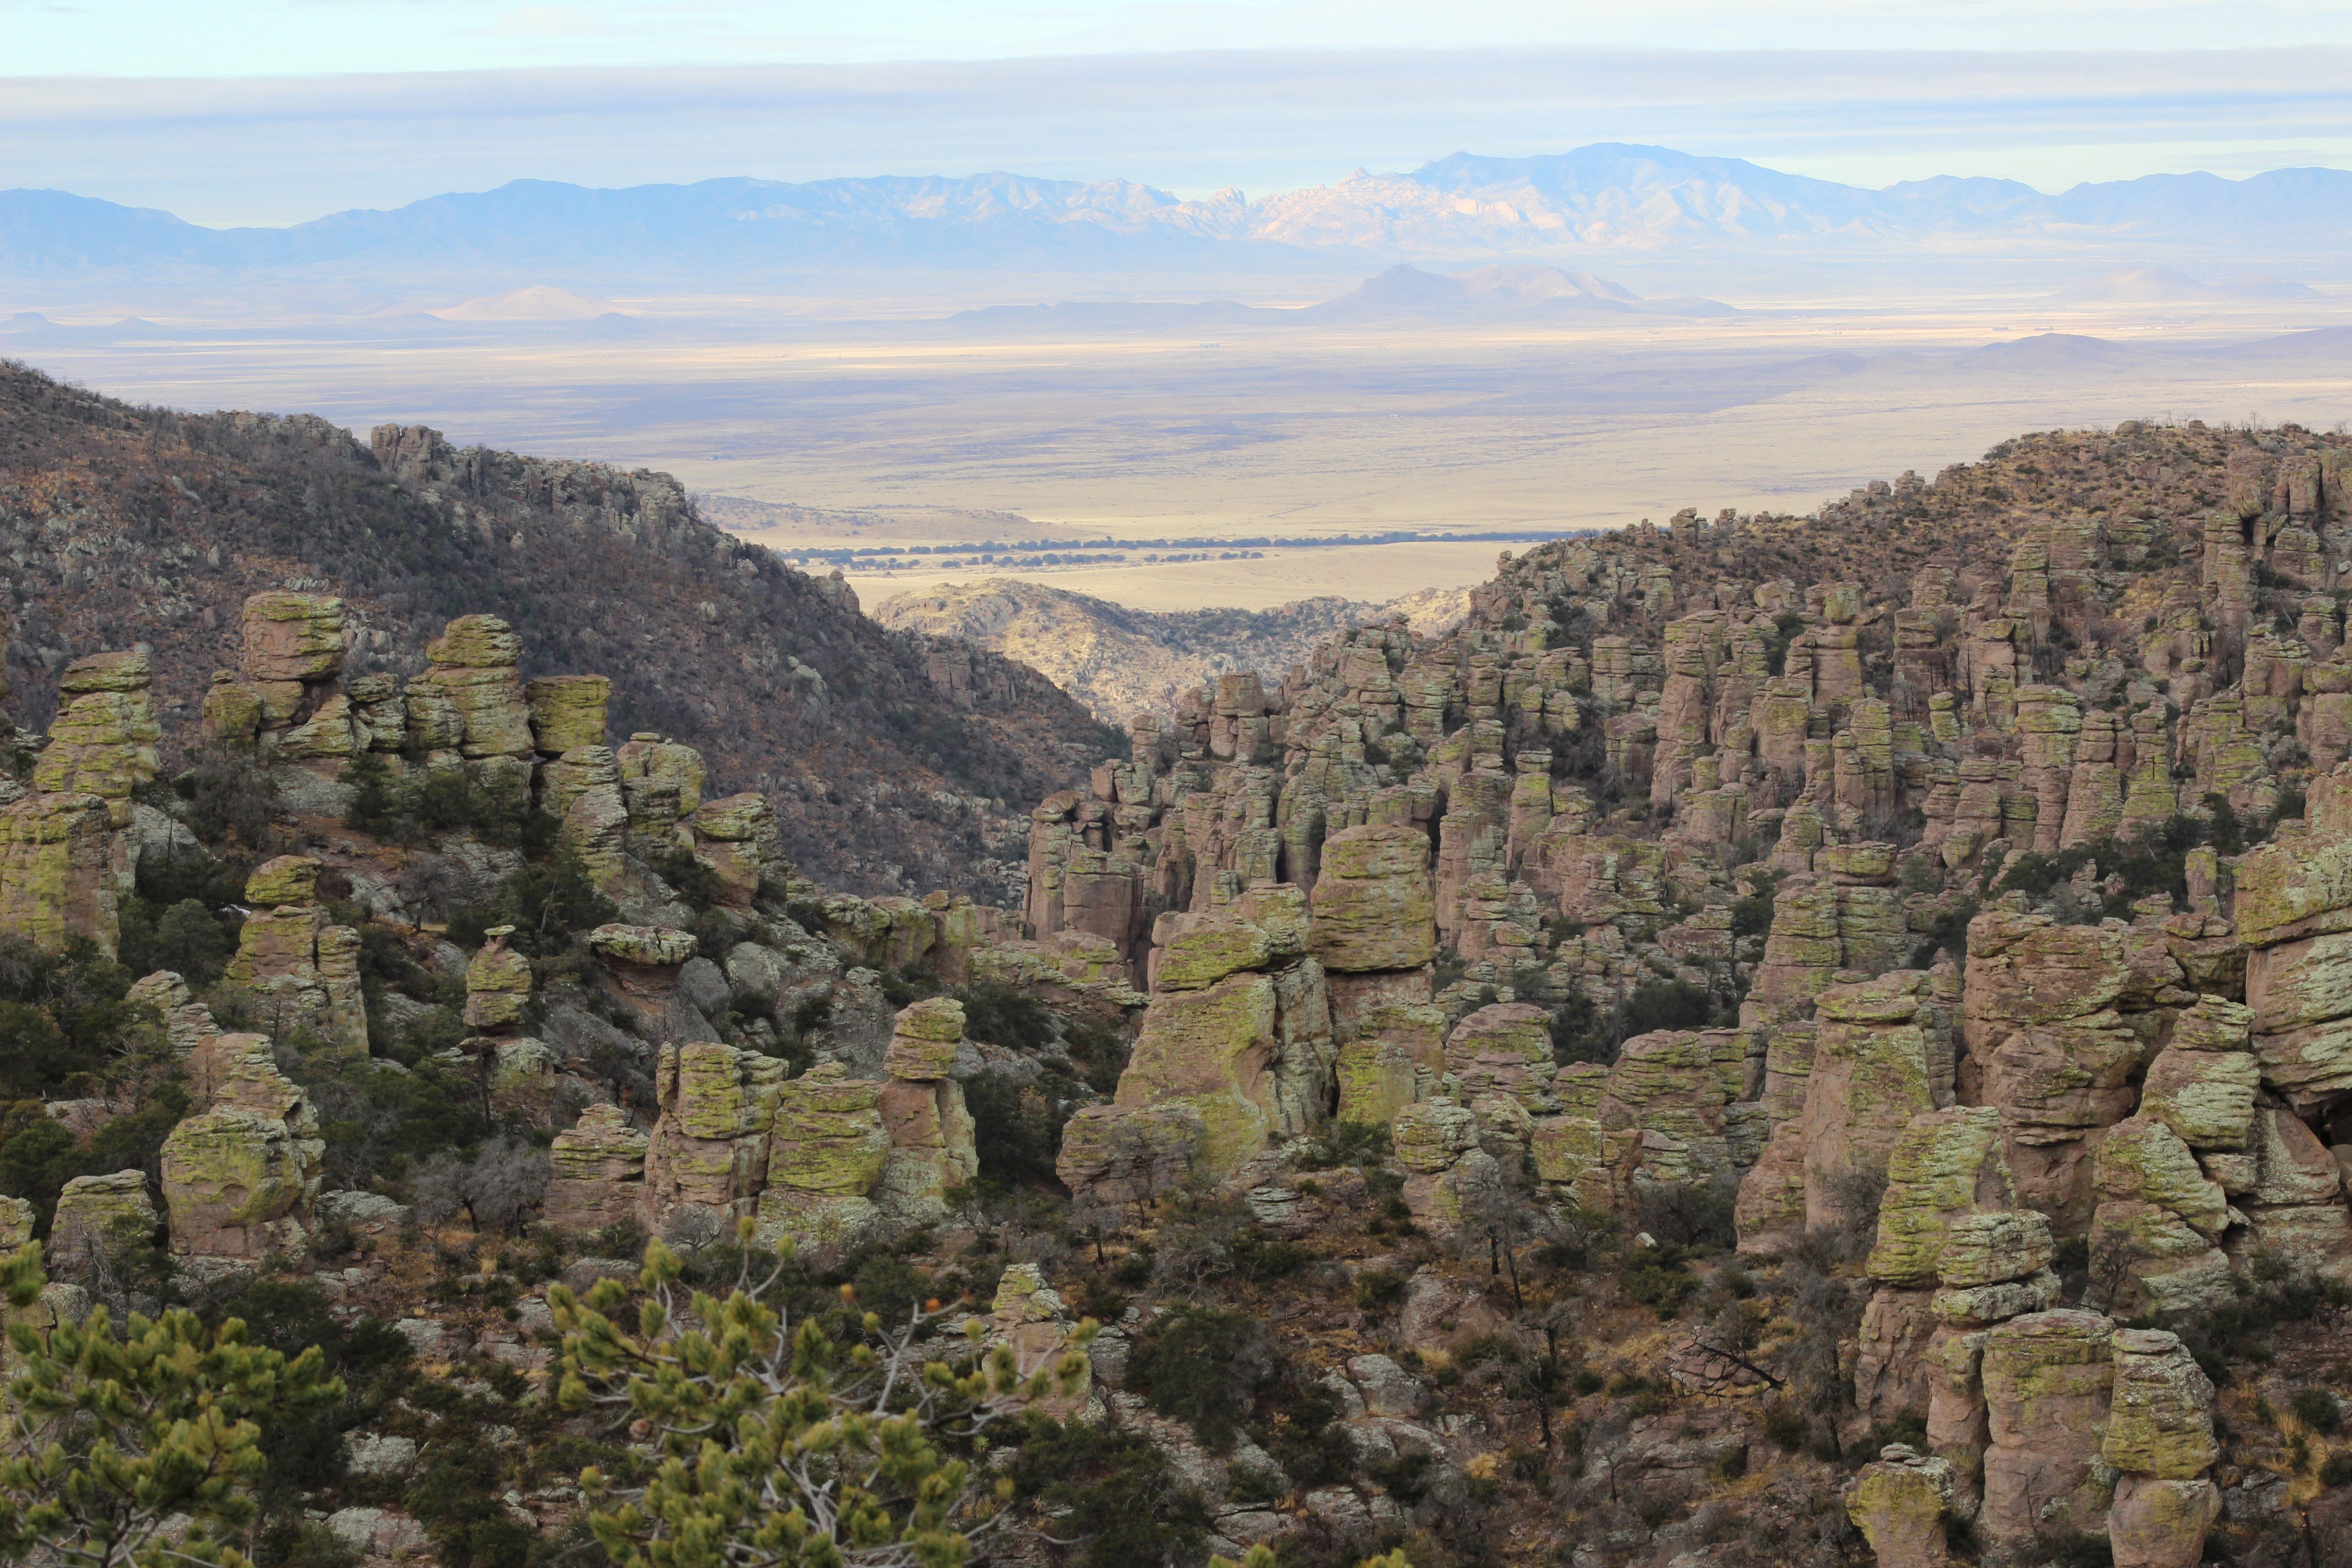 Rock formations with valley and mountain view in the distance.